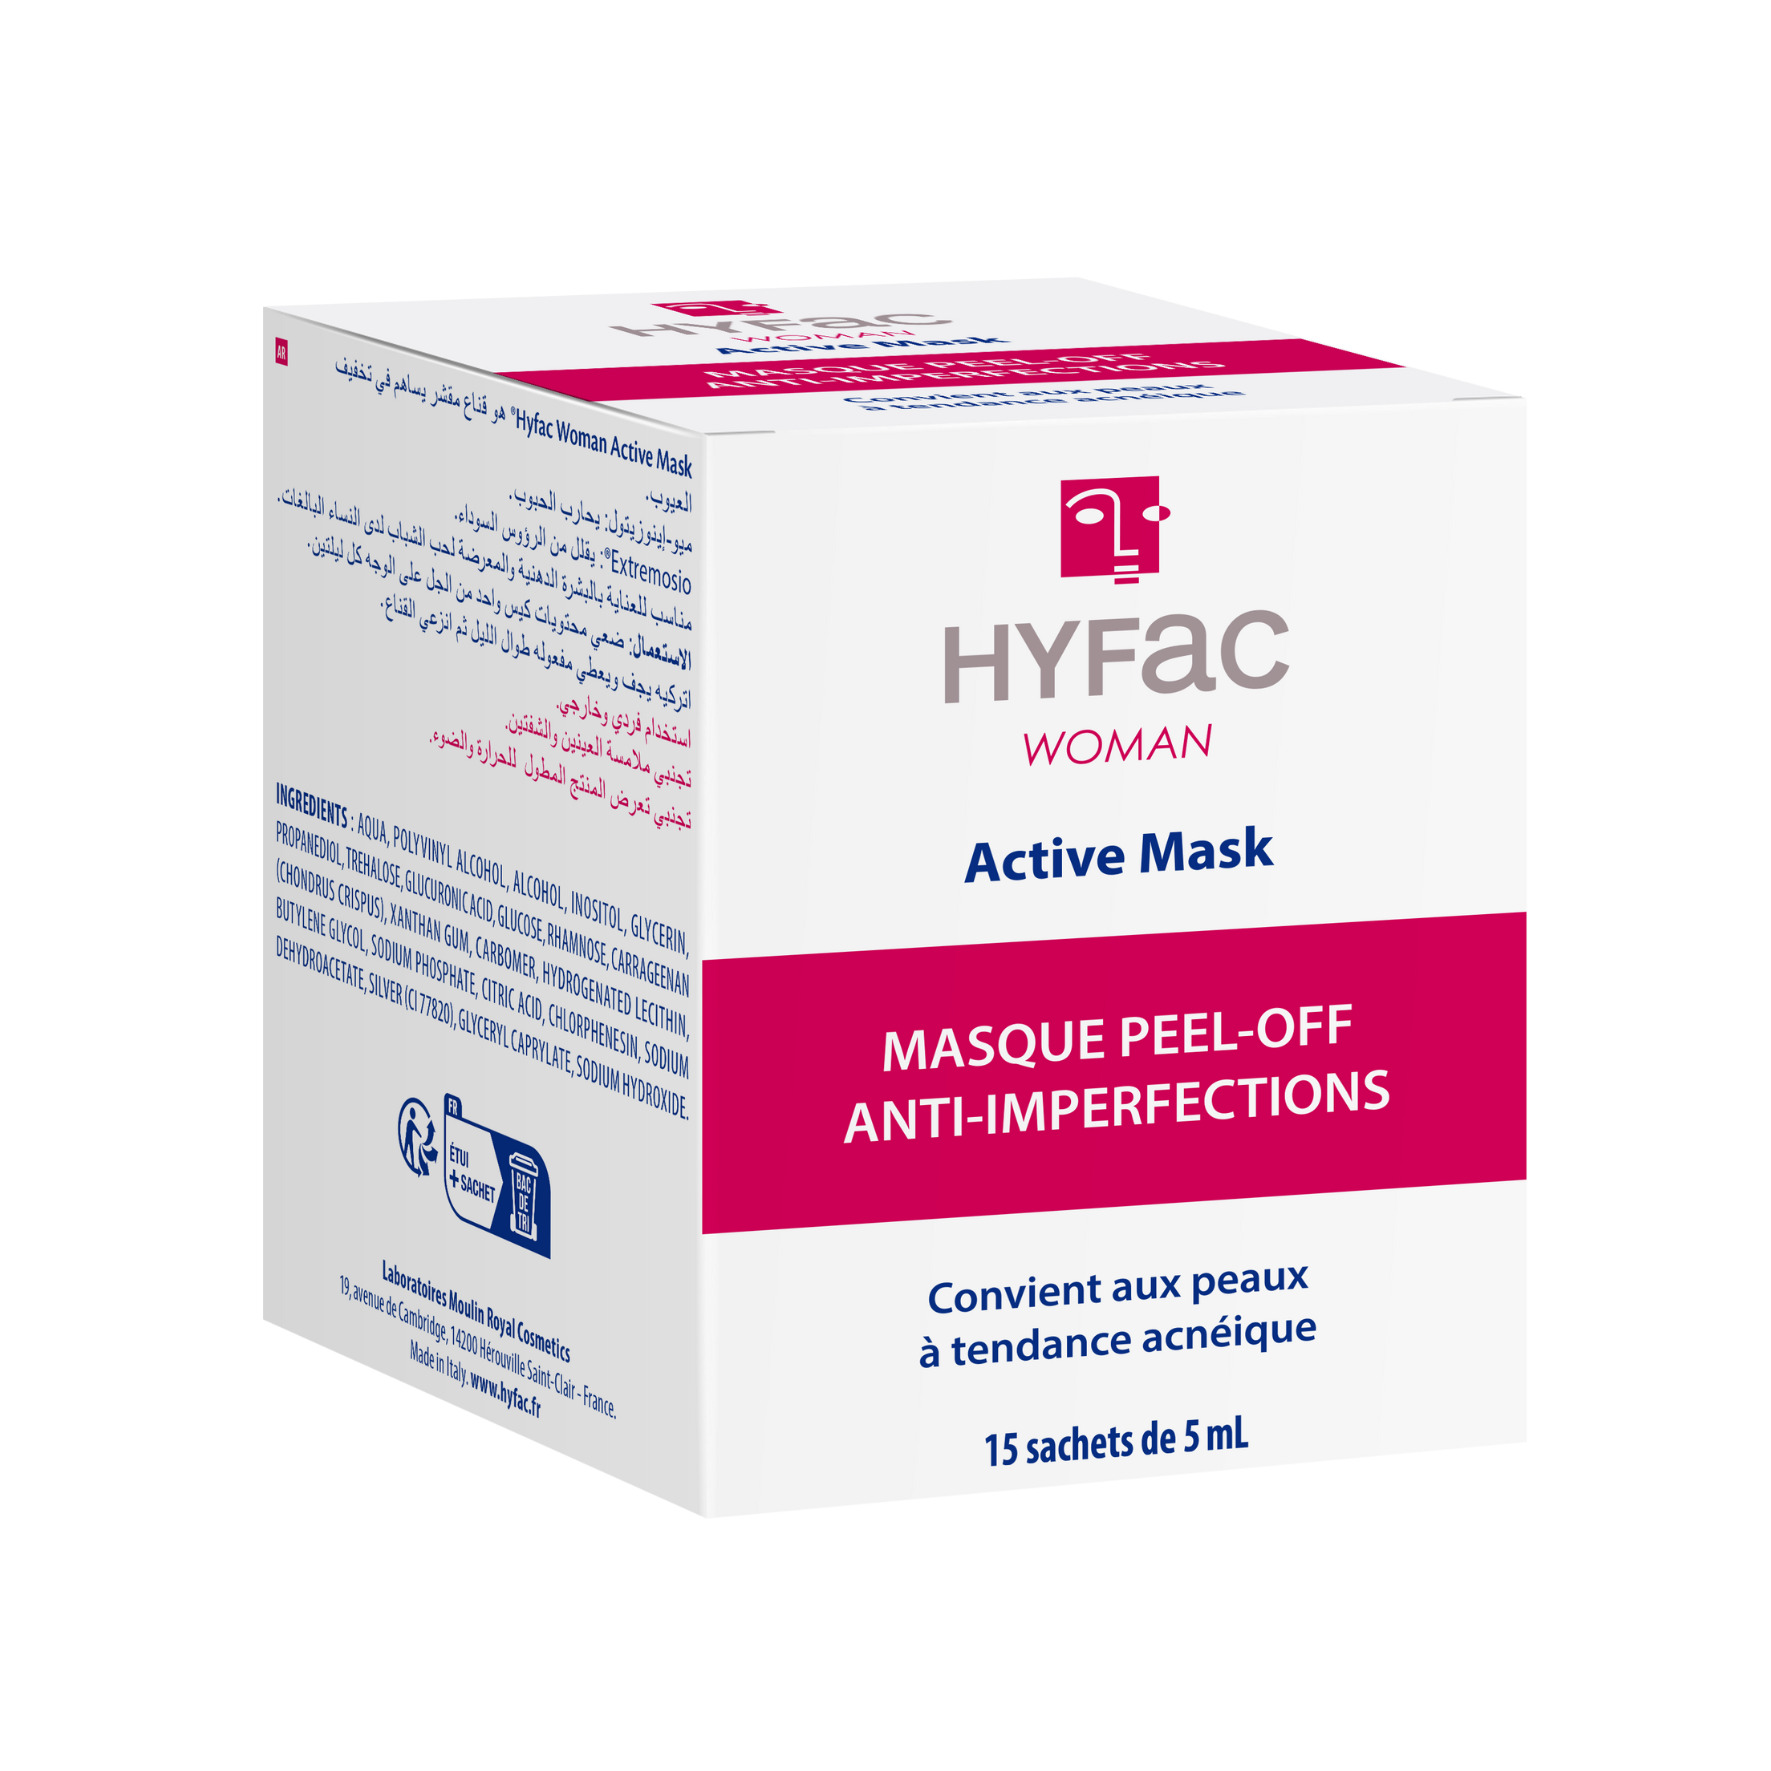 HYFAC WOMAN Active Mask acne treatment for adult women